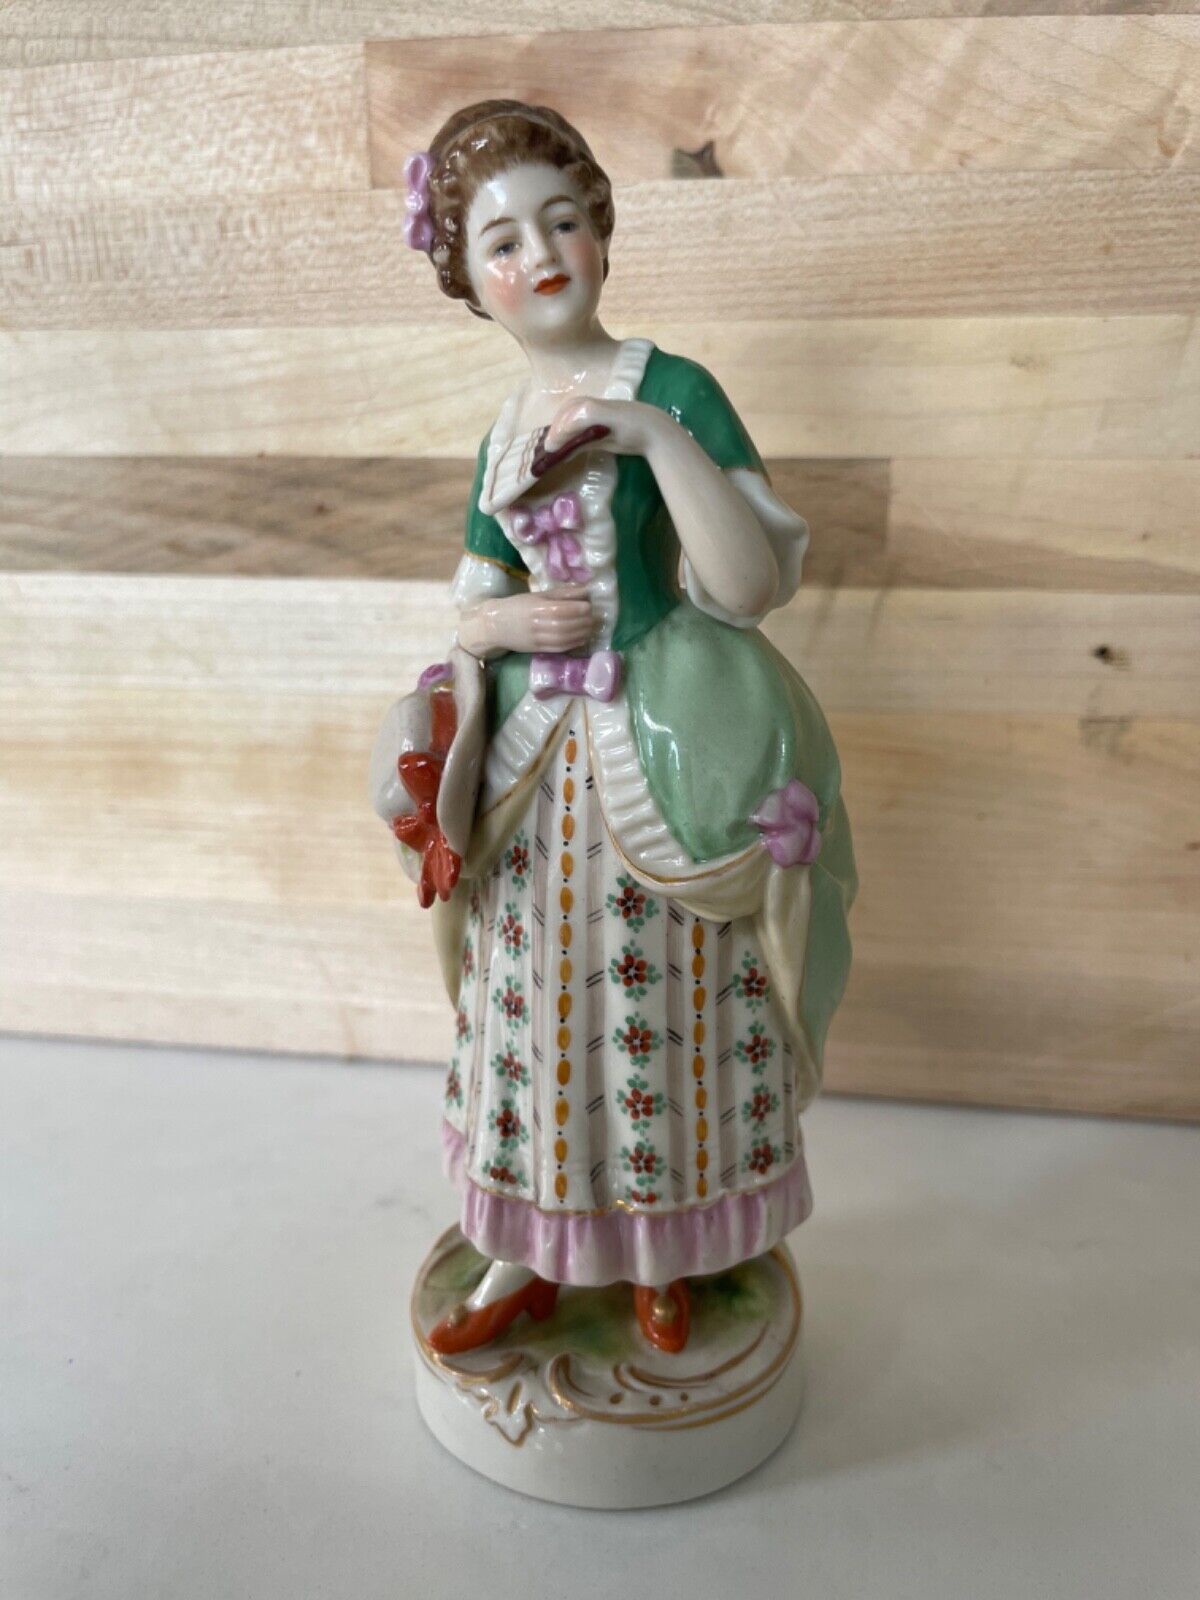 Antique Kister Germany Porcelain Figurines Scheibe Alsbach Kister